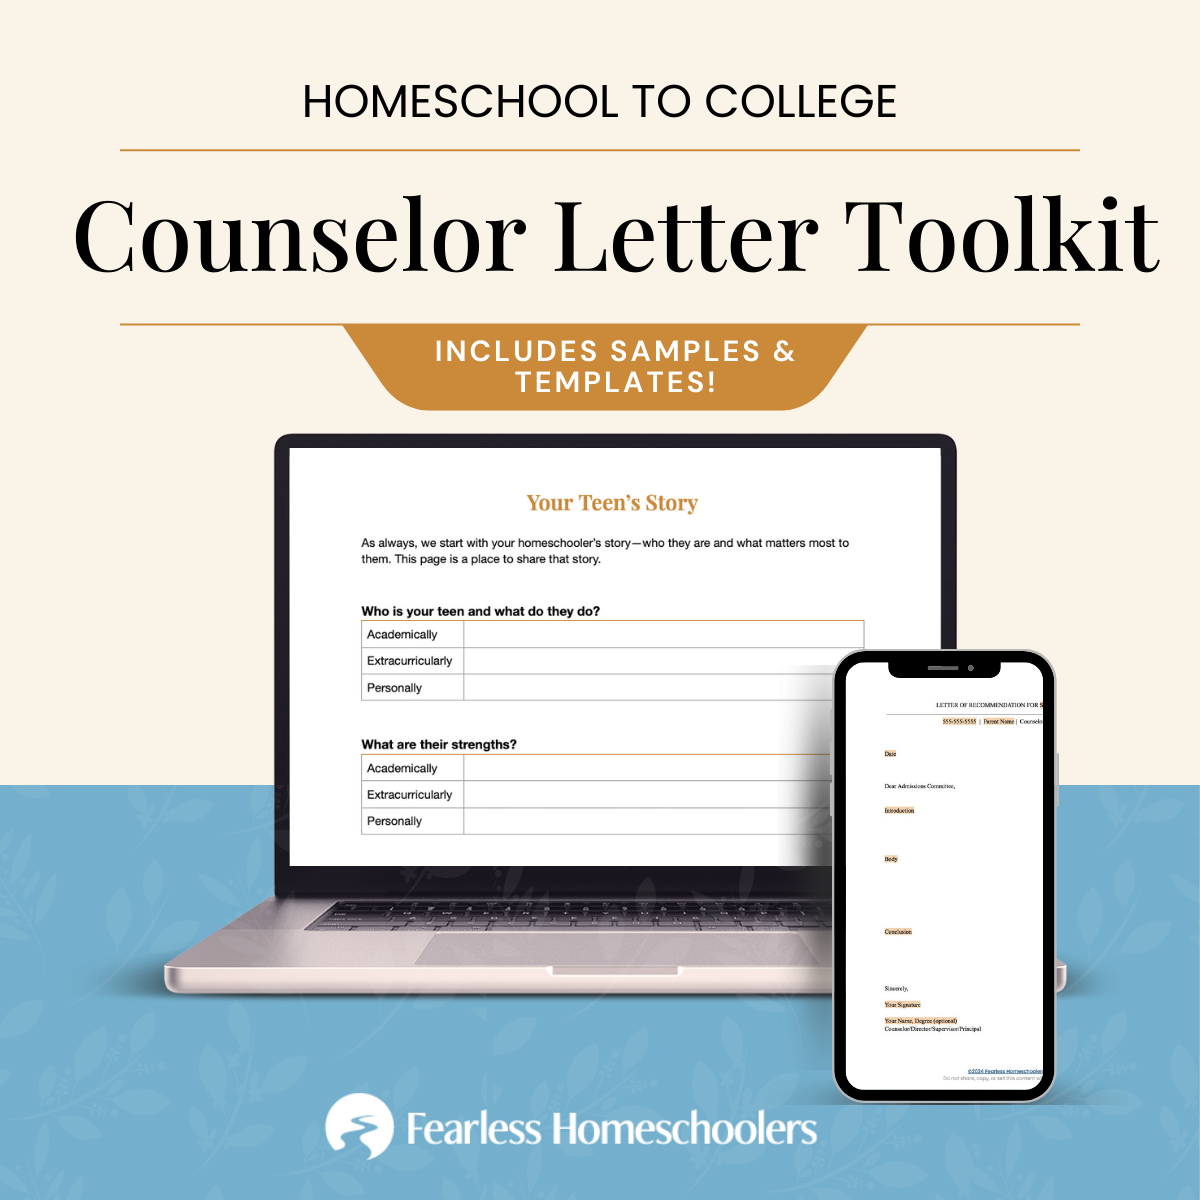 Homeschool Counselor Letter Template Toolkit